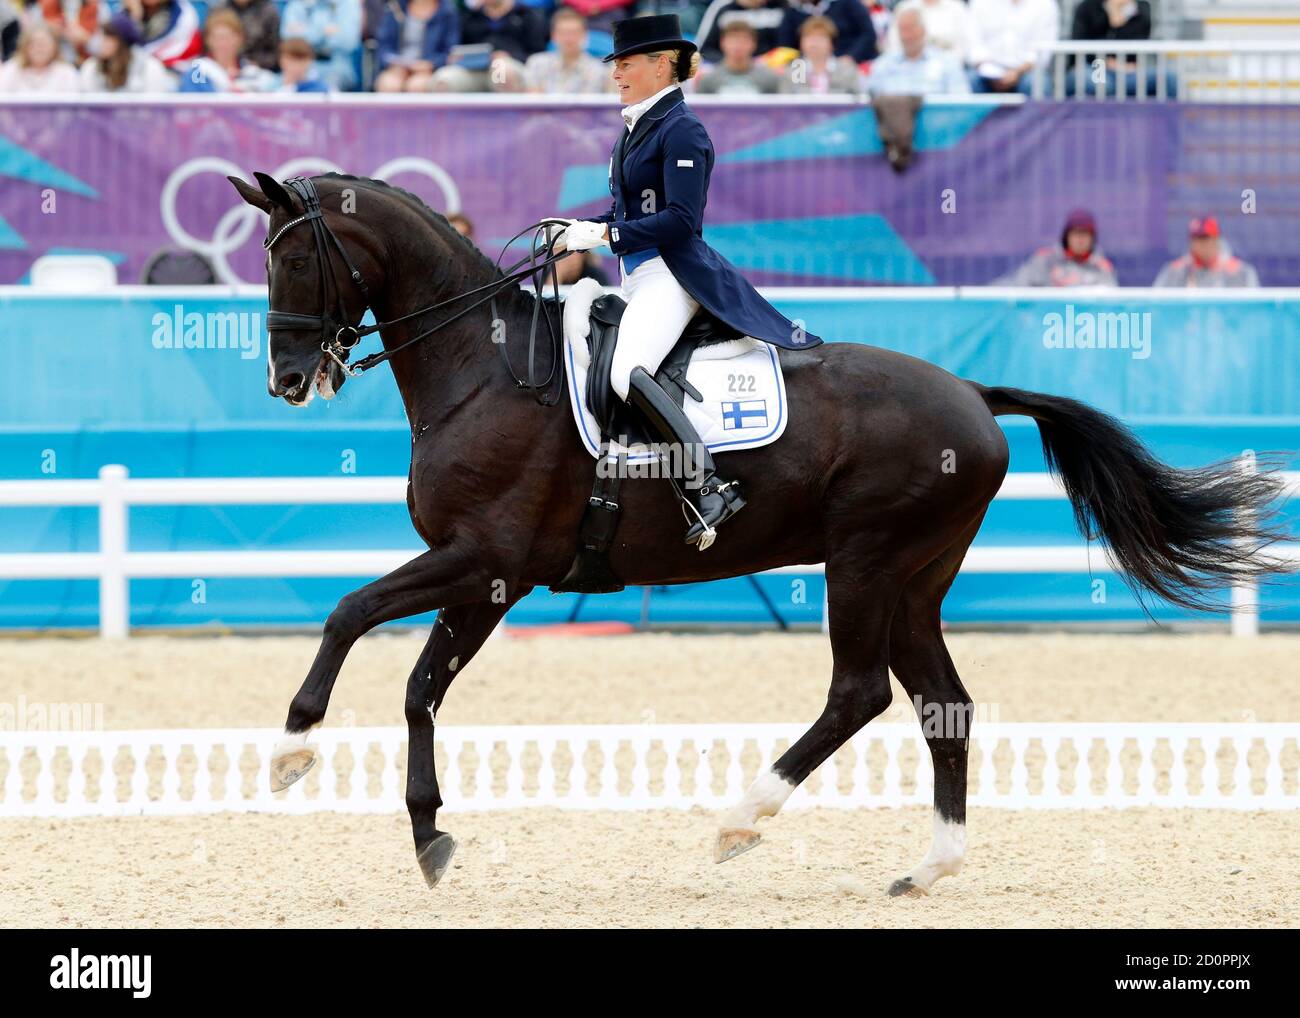 Finland's Mikaela Lindh riding Mas Guapo competes in the equestrian dressage individual grand prix special at the London 2012 Olympic Games in Greenwich Park August 7, 2012.    REUTERS/Mike Hutchings (BRITAIN  - Tags: SPORT EQUESTRIANISM SPORT OLYMPICS) Stock Photo